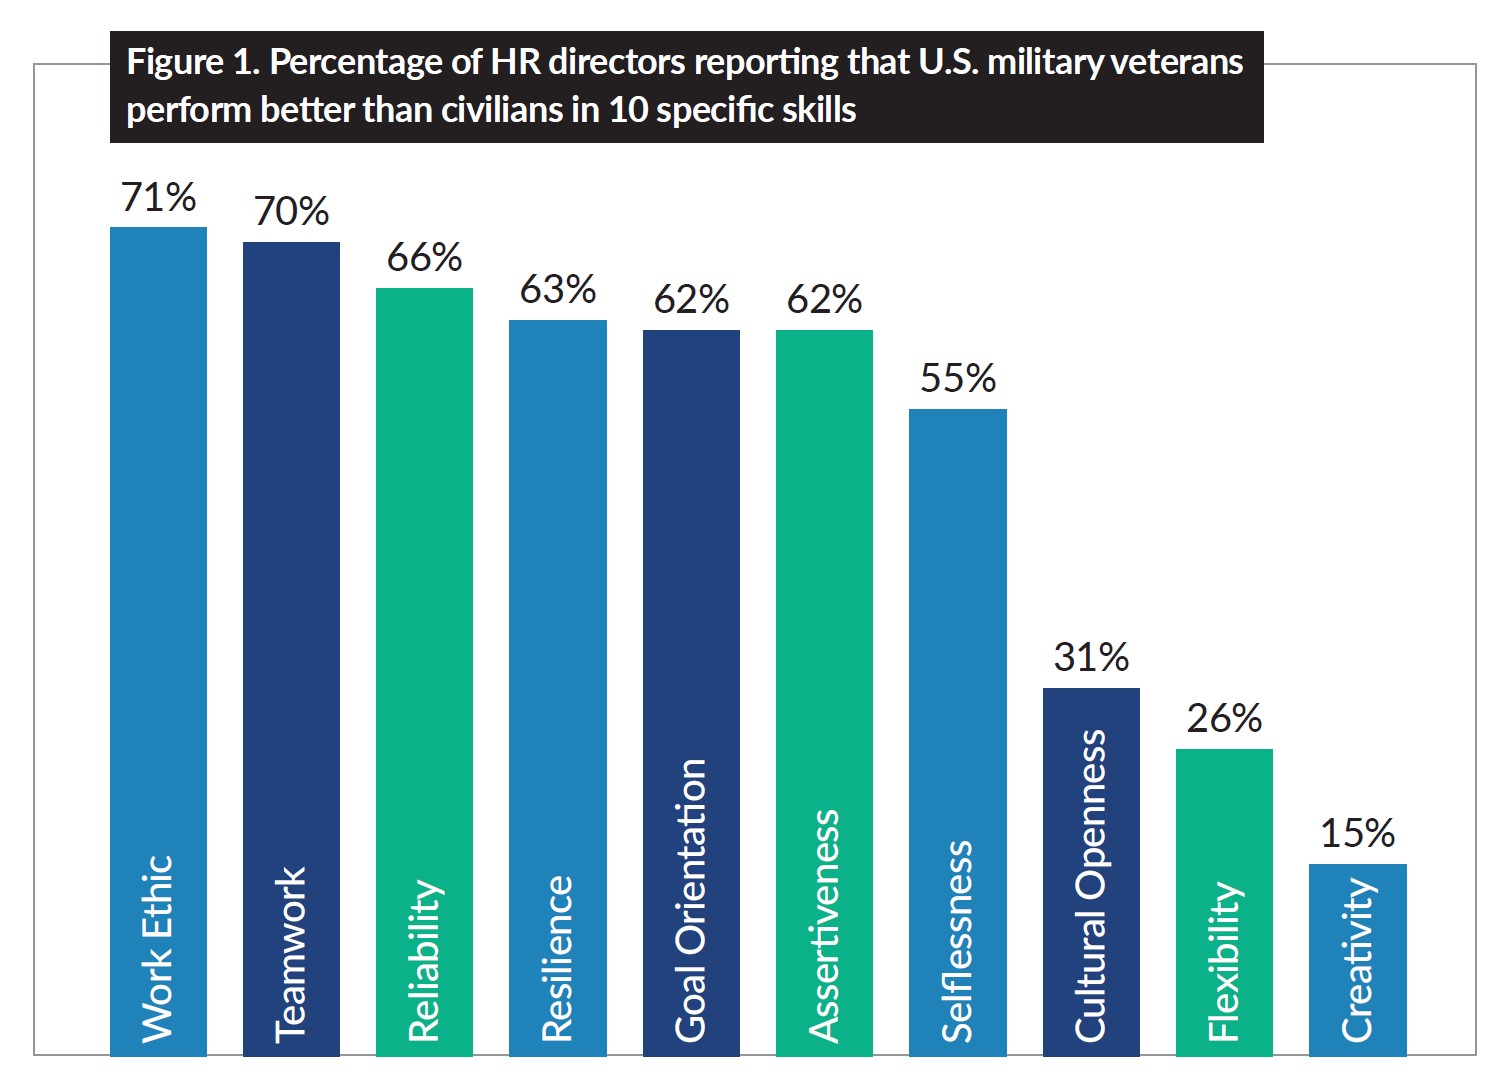 Figure 1. Percentage of HR directors reporting that U.S. military veterans perform better than civilians in 10 specific skills